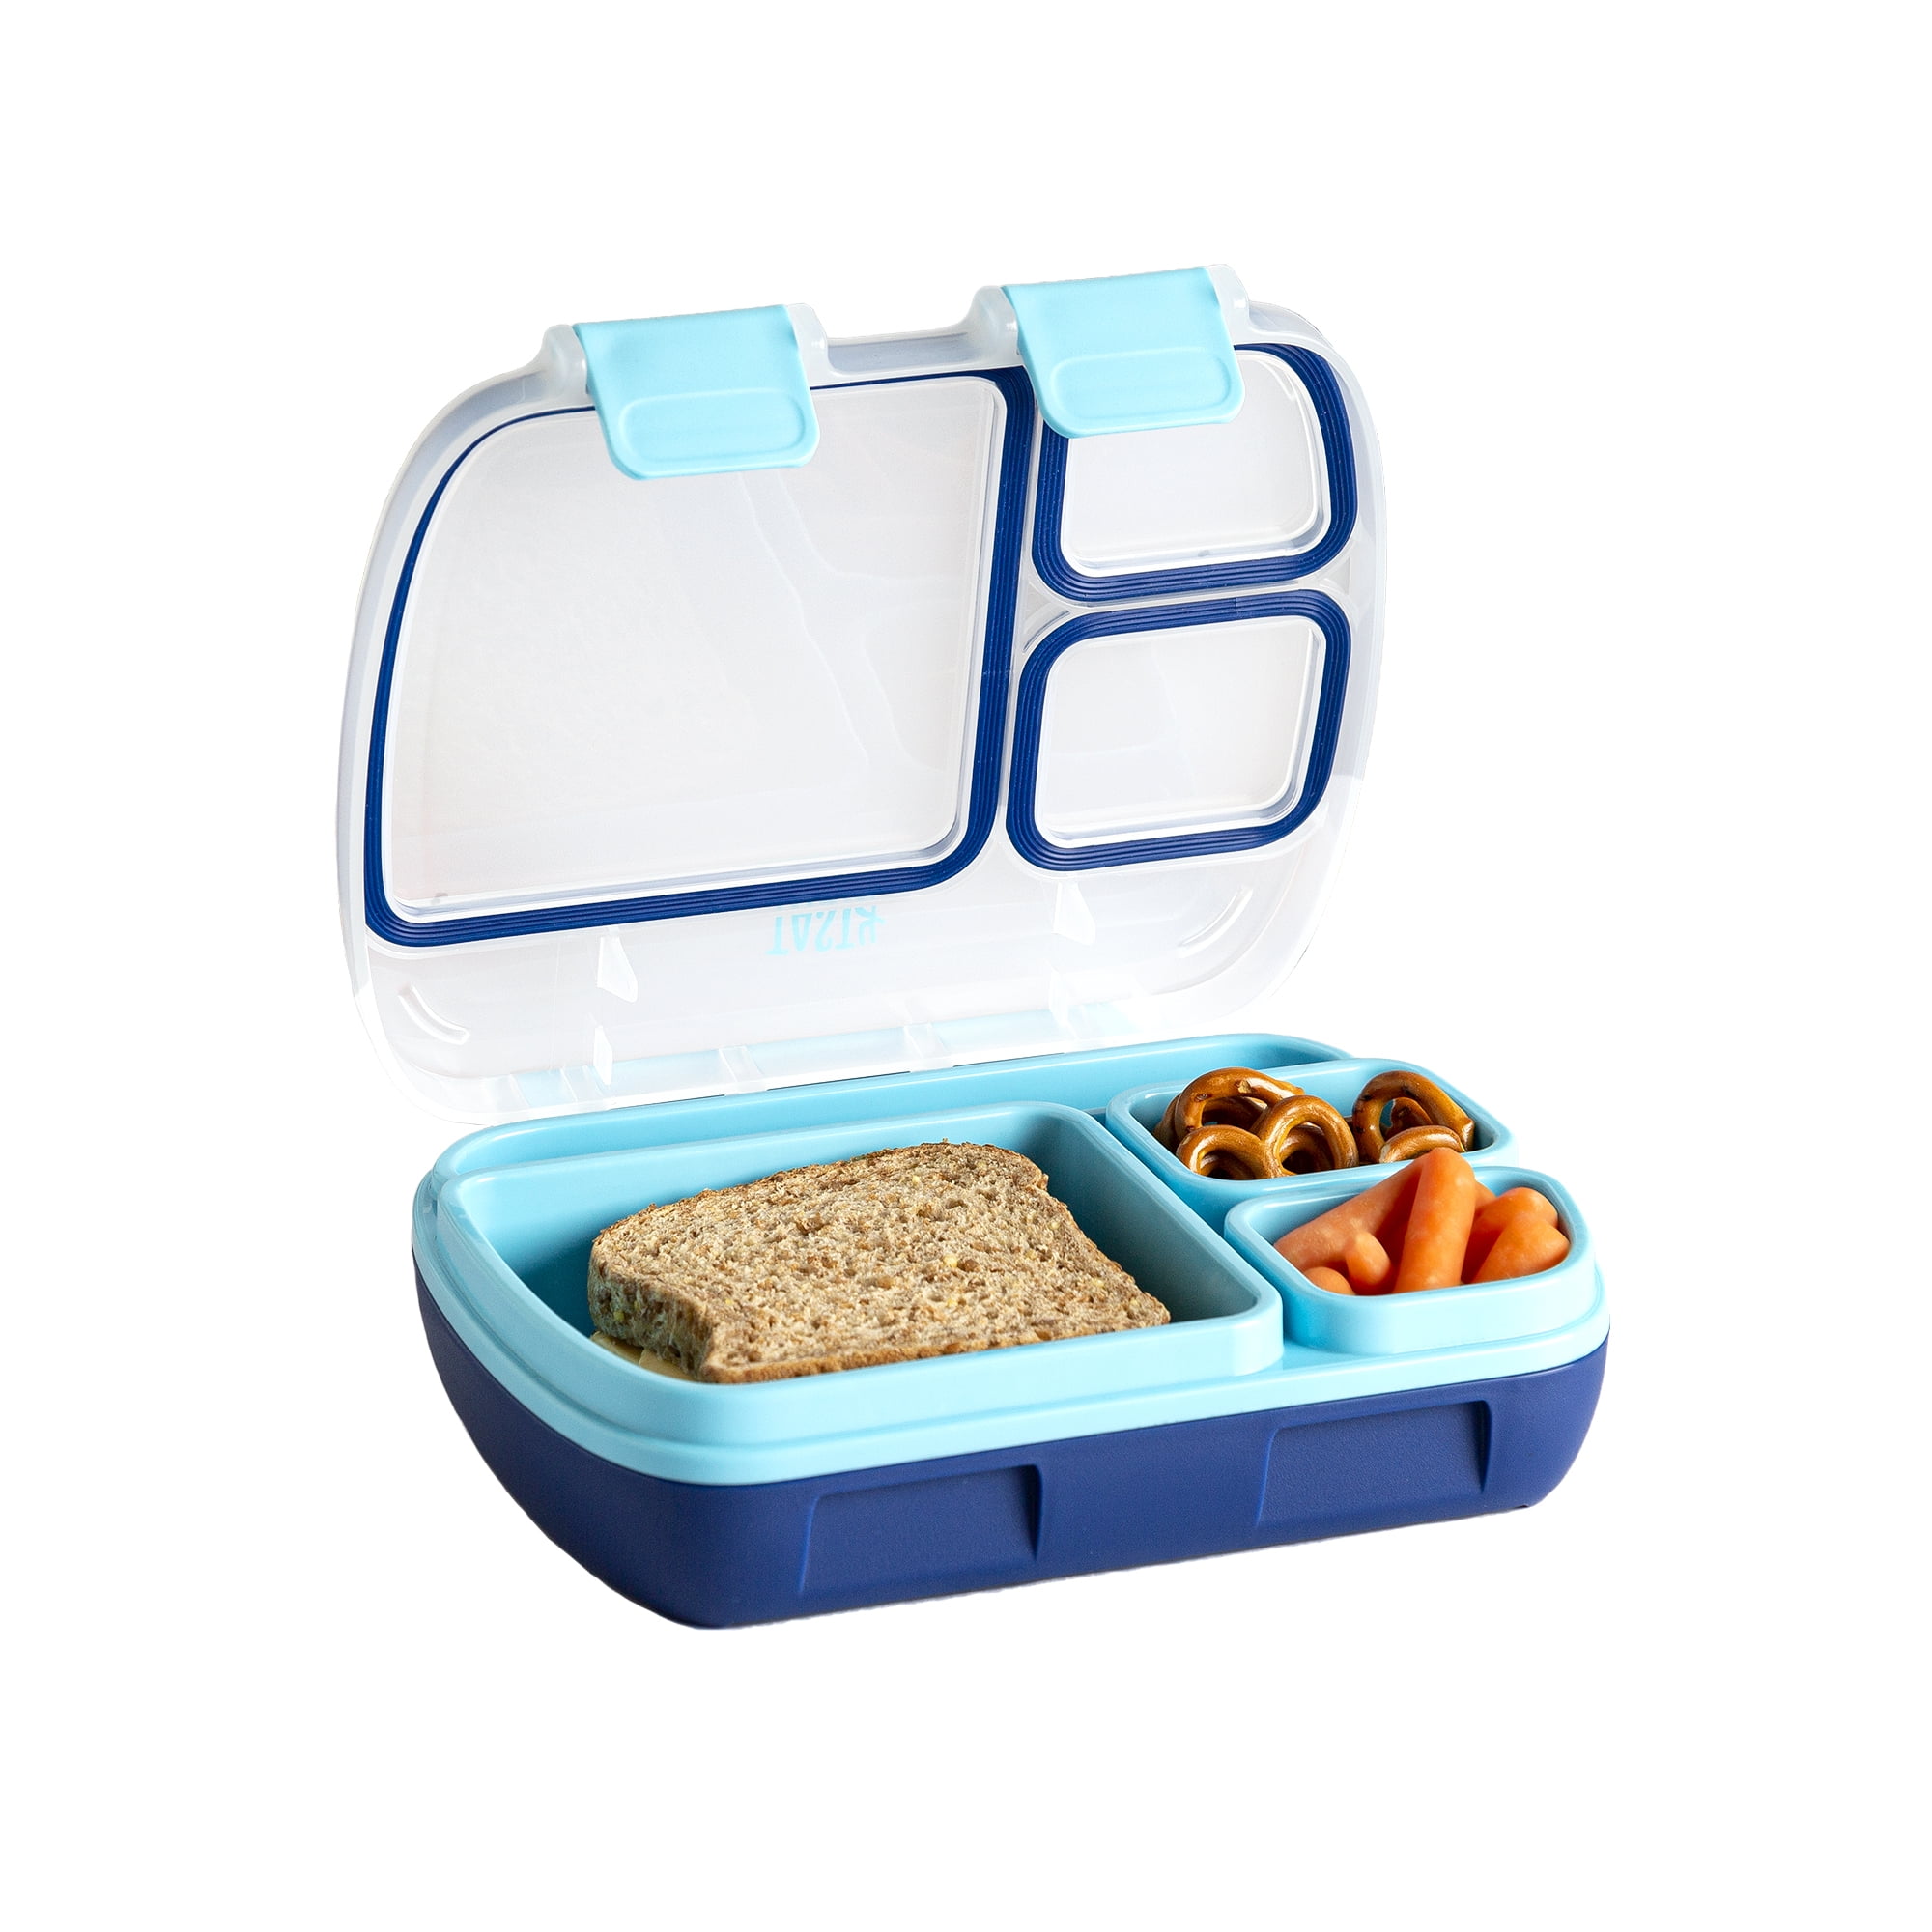 Tasty Bento Box, Lunch Box for Kids and Removable Tray and Handle, Blue - Walmart.com